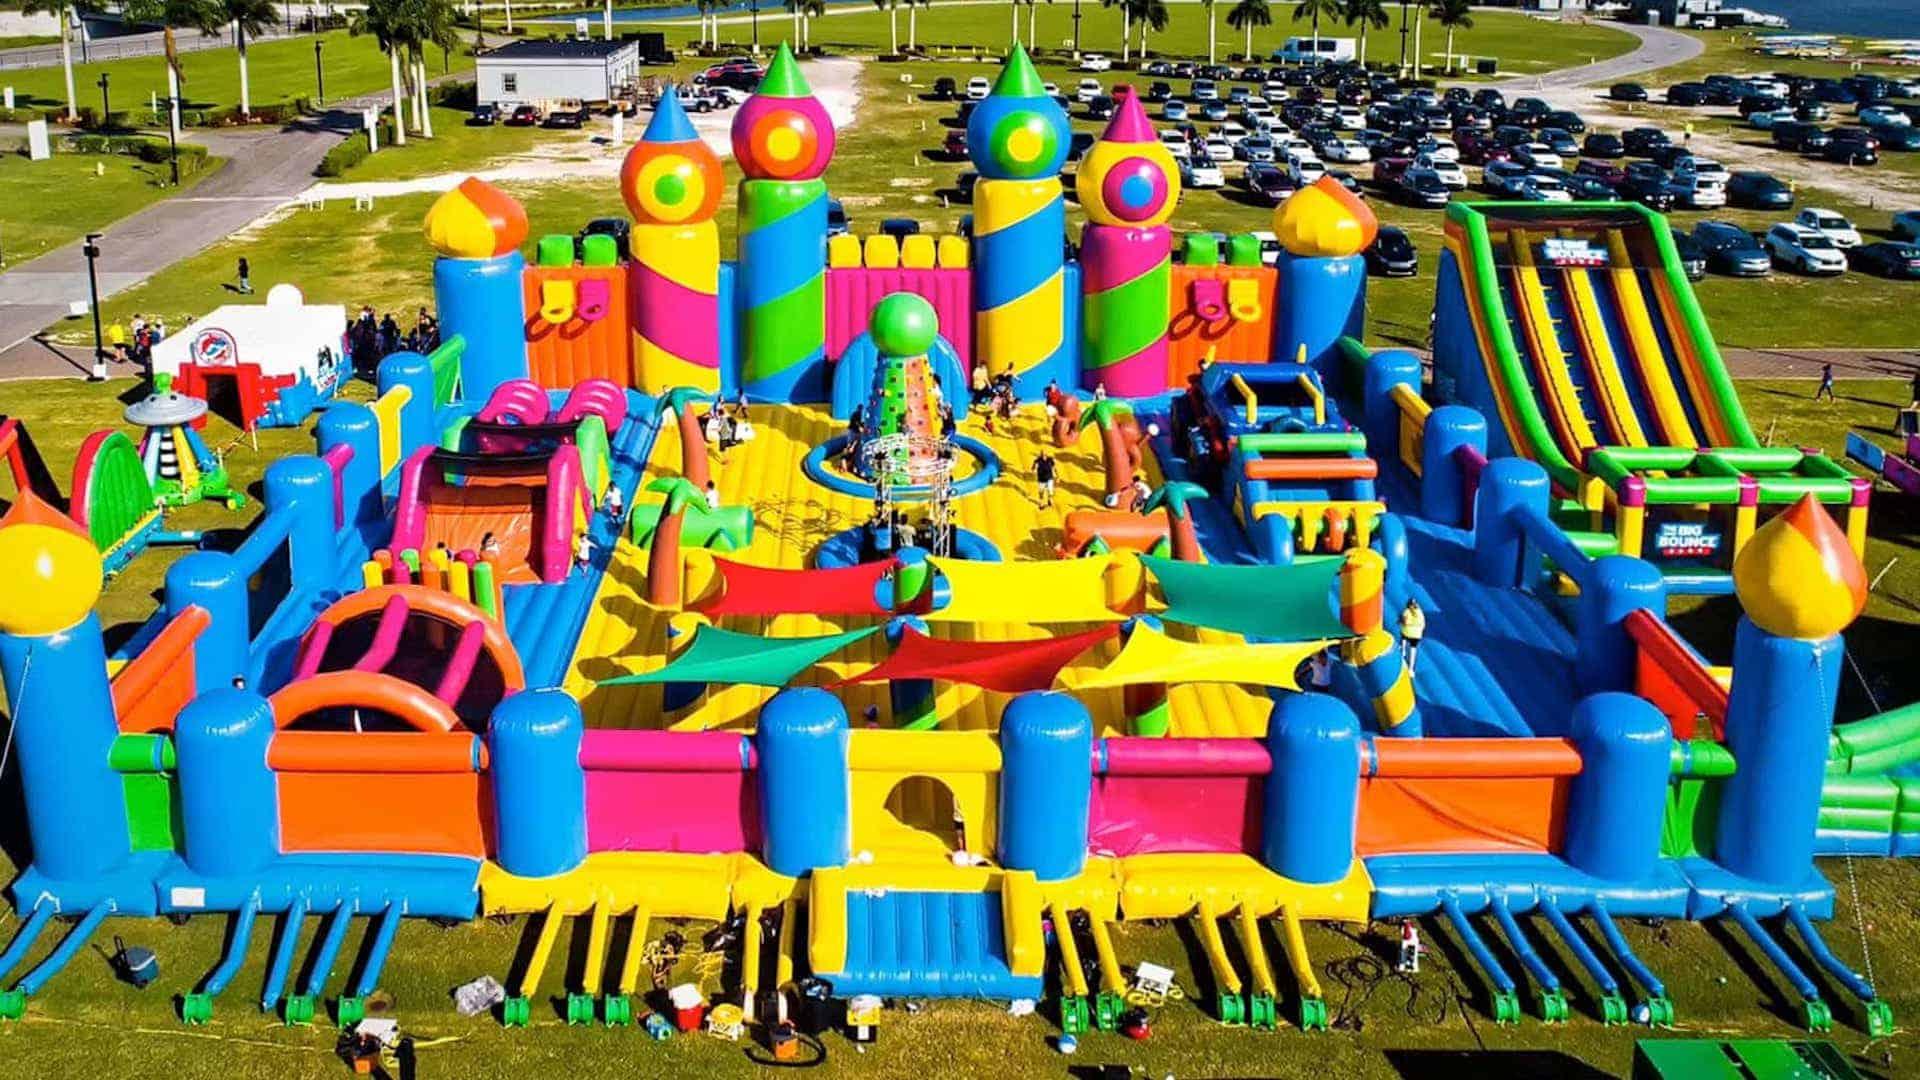 Biggest bounce house in the world coming to Tampa - That's So Tampa